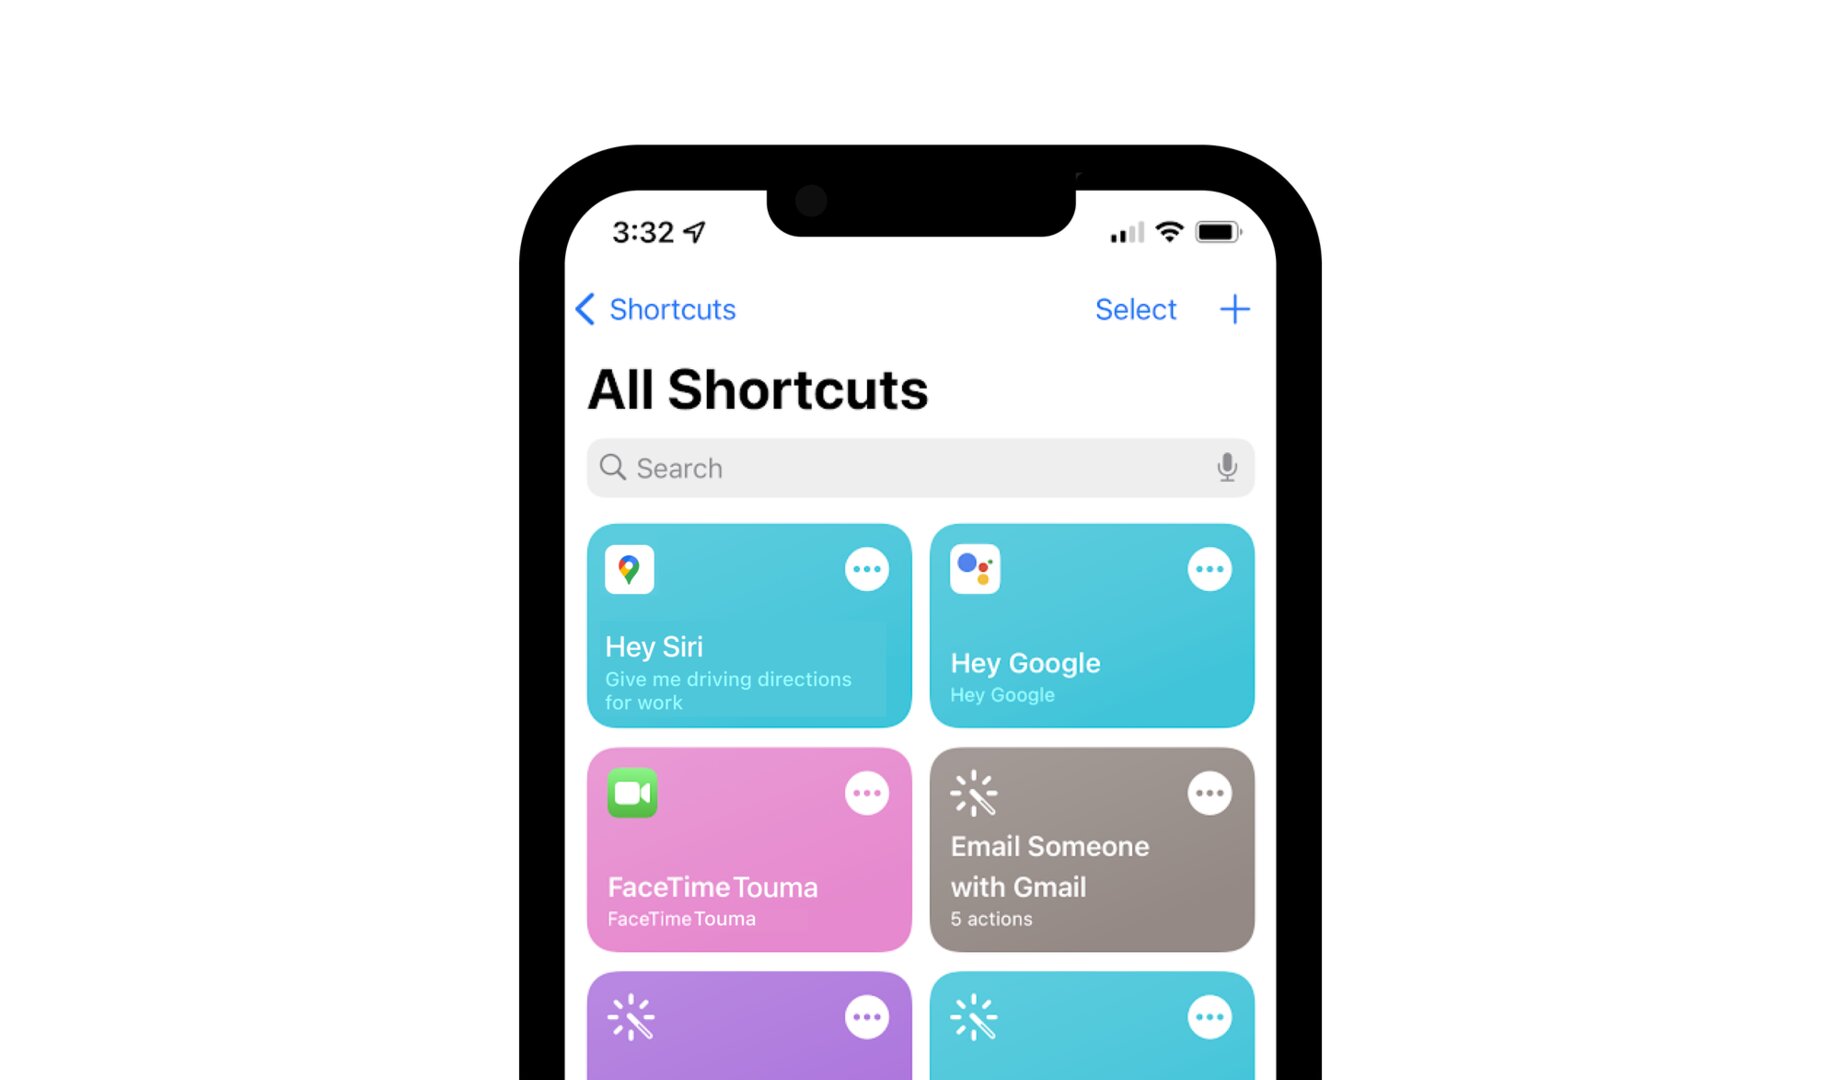 Greater integration in shortcuts